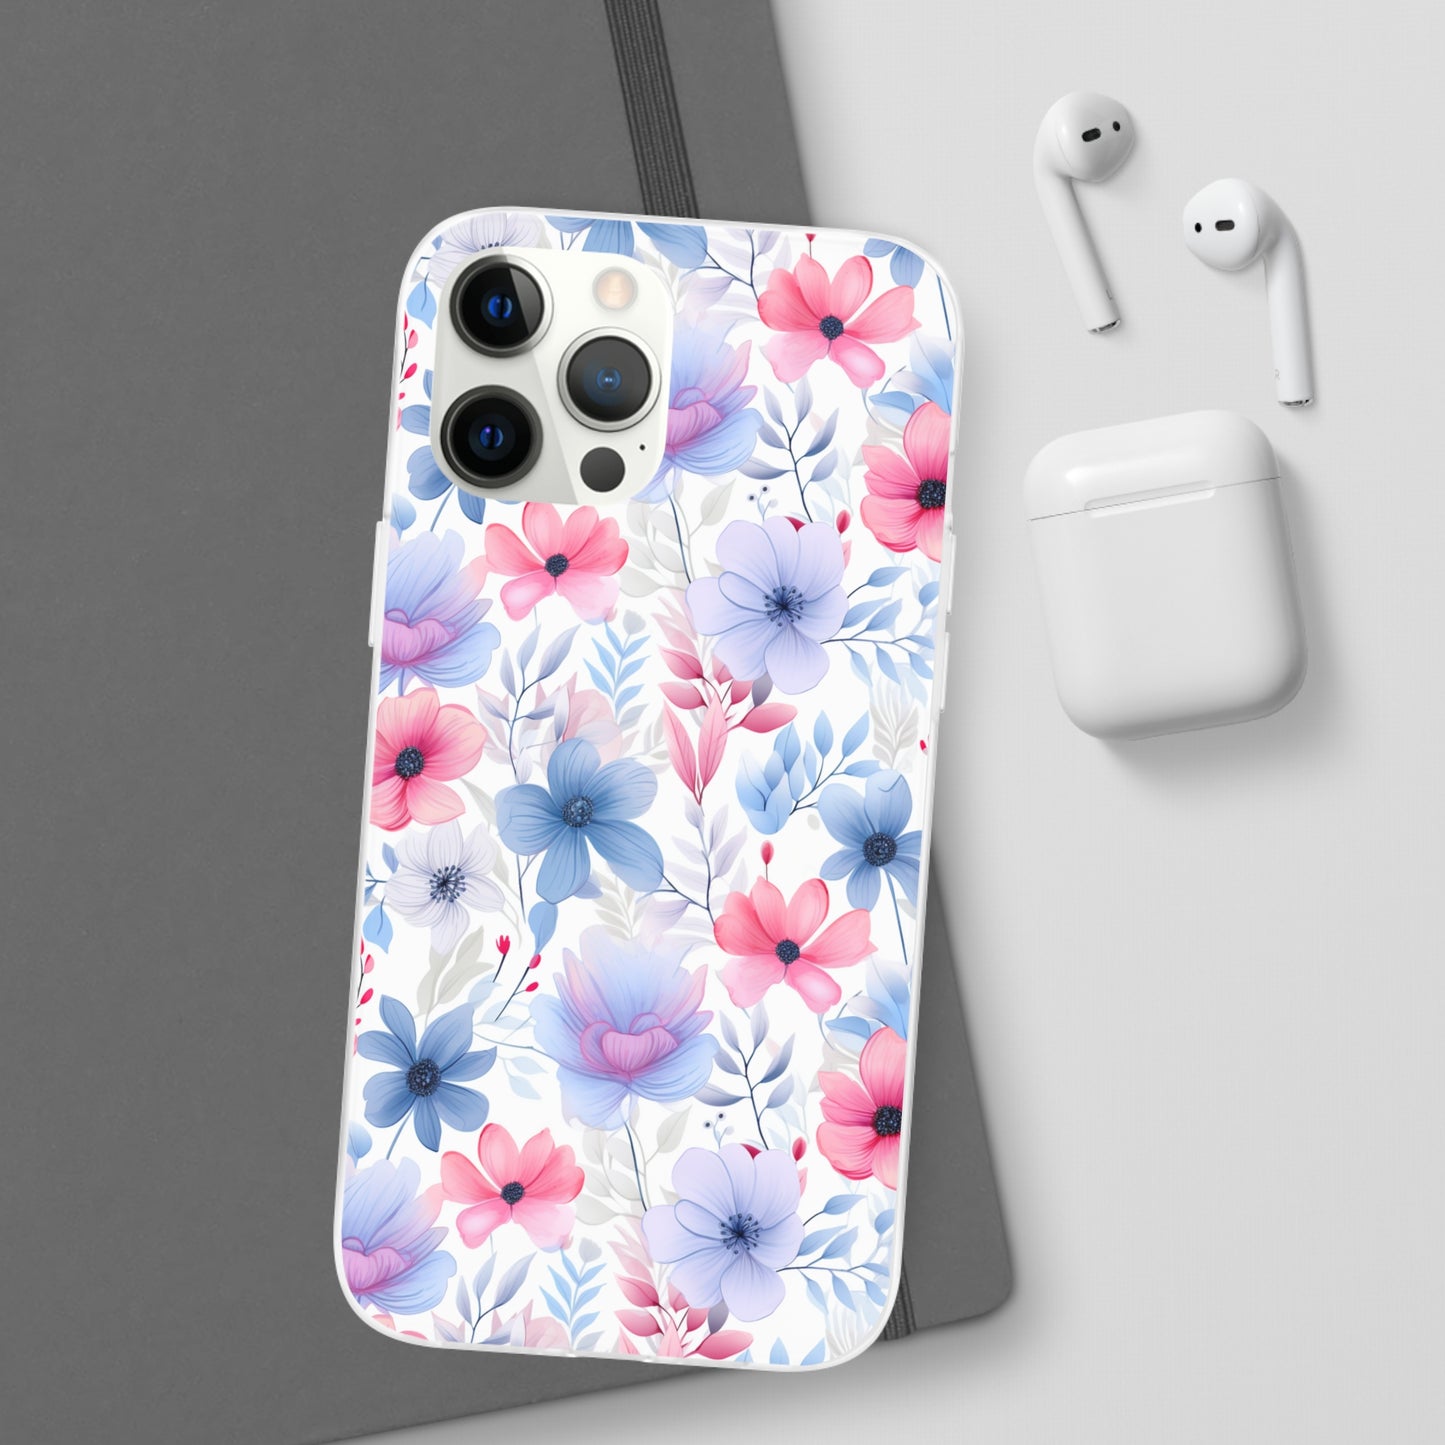 Floral Whispers - Soft Hues of Violets, Pinks, and Blues - Flexi Phone Case Phone Case Pattern Symphony iPhone 12 Pro Max  